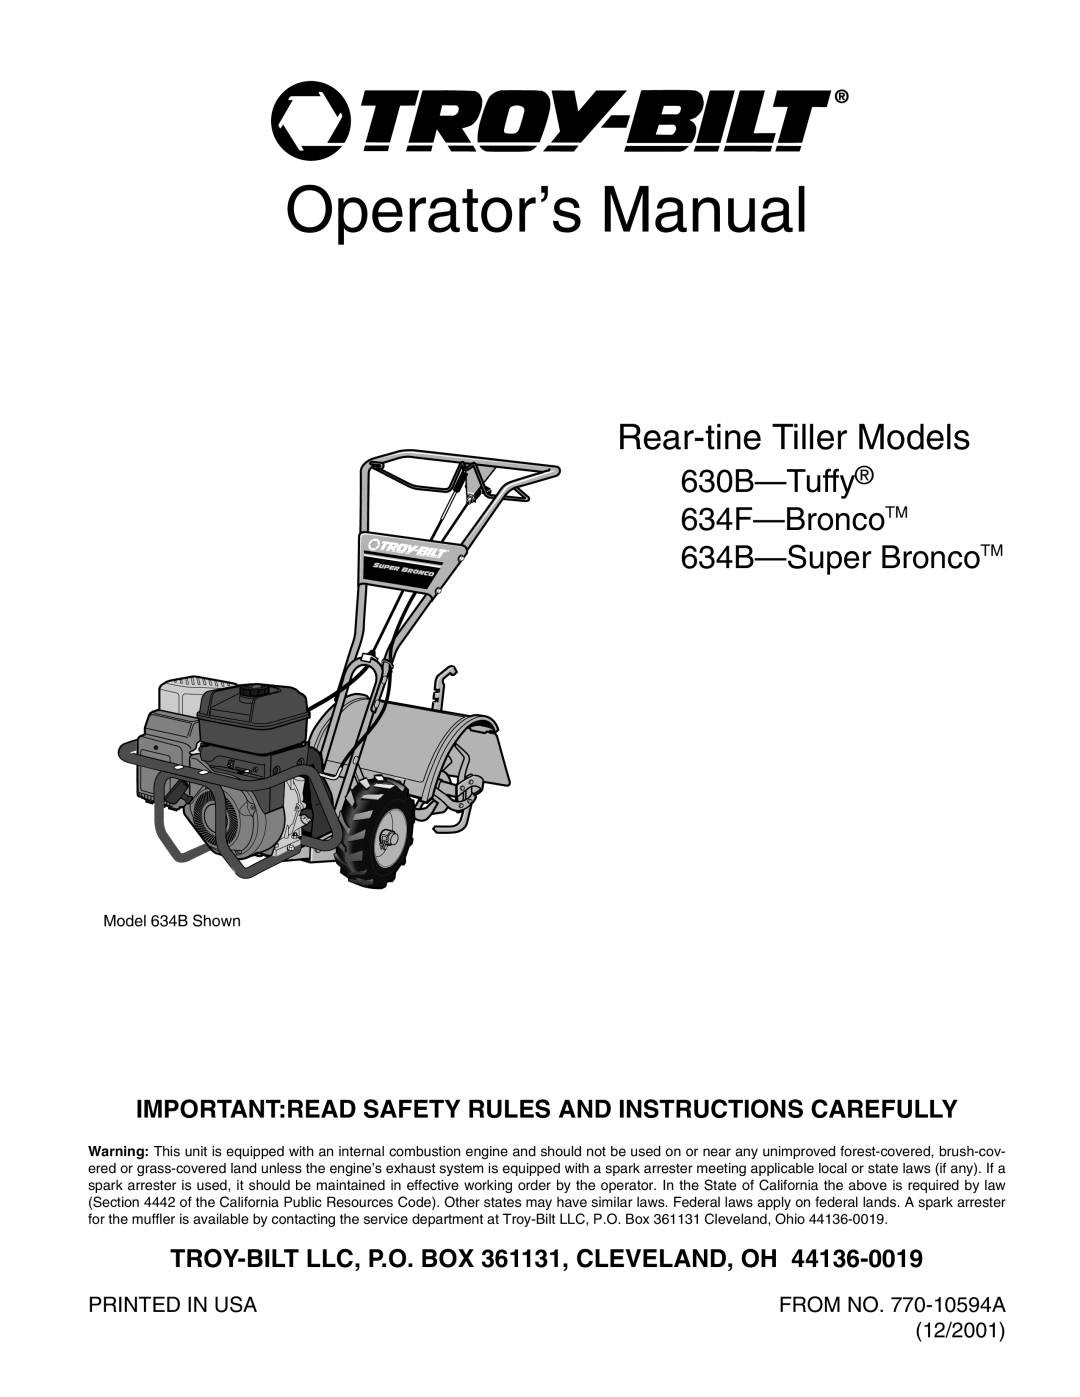 Troy-Bilt 630B-Tuffy, 634F-Bronco, 634B-Super Bronco manual Importantread Safety Rules And Instructions Carefully, 12/2001 